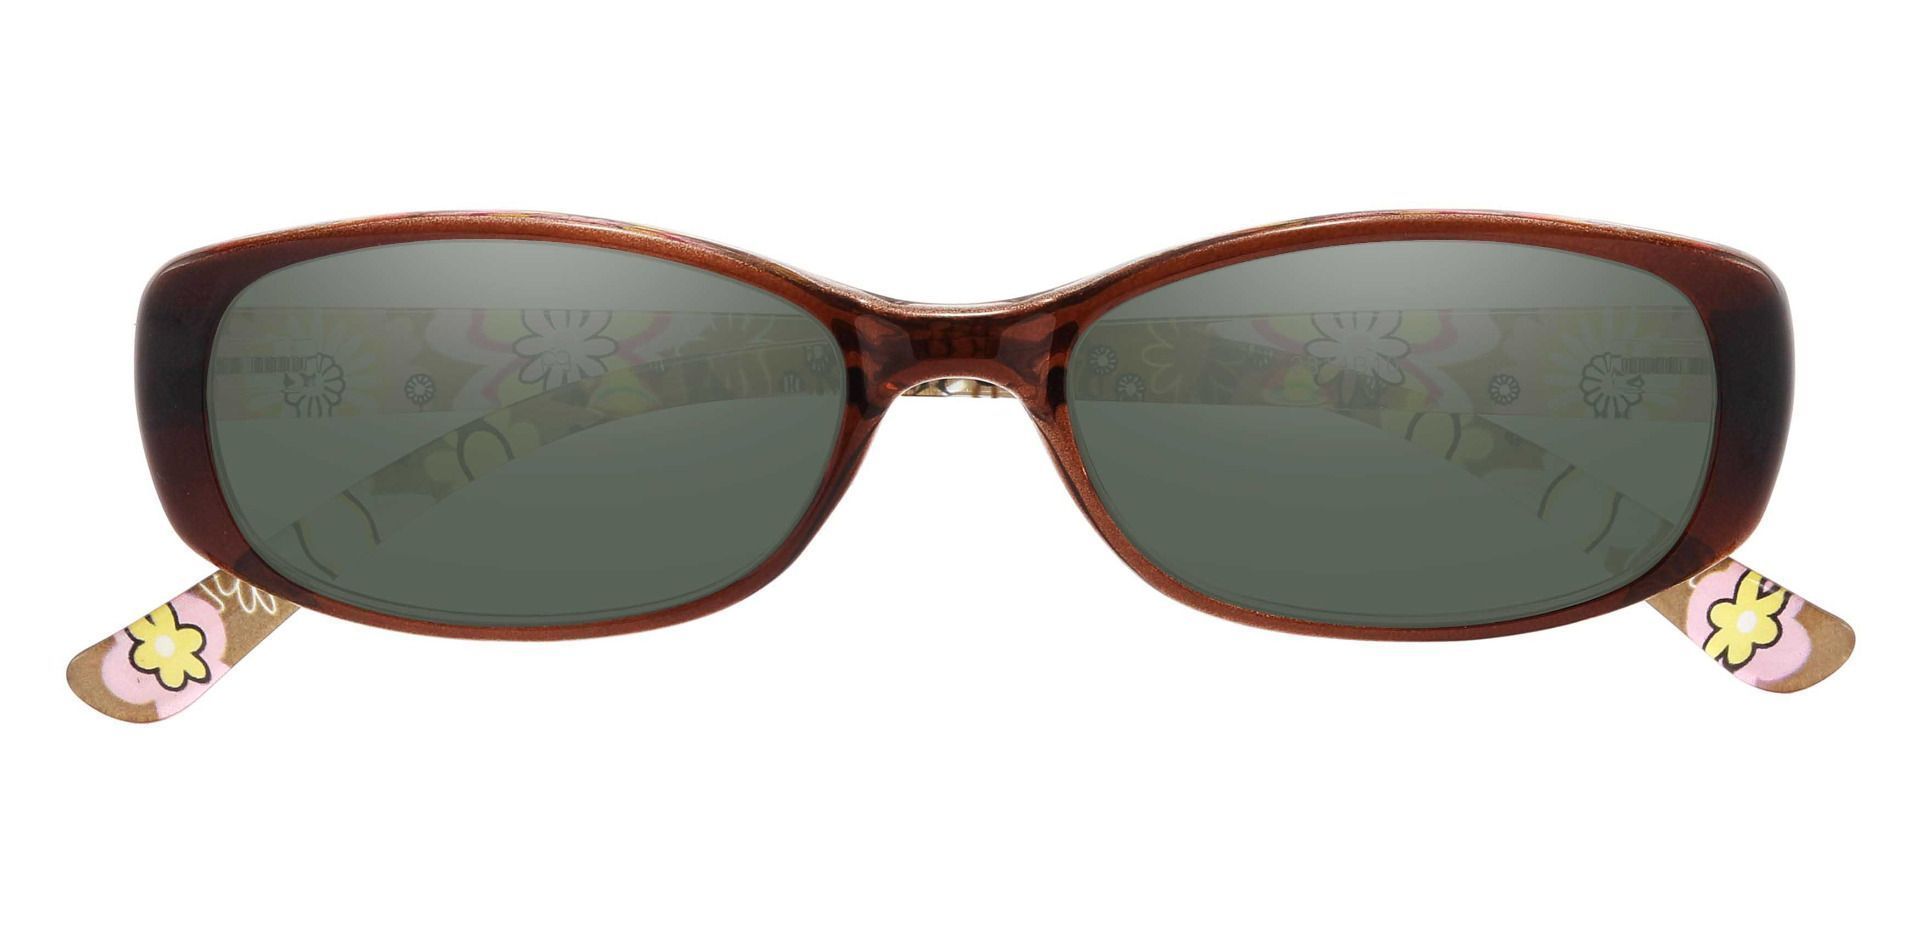 Bethesda Rectangle Non-Rx Sunglasses - Brown Frame With Green Lenses